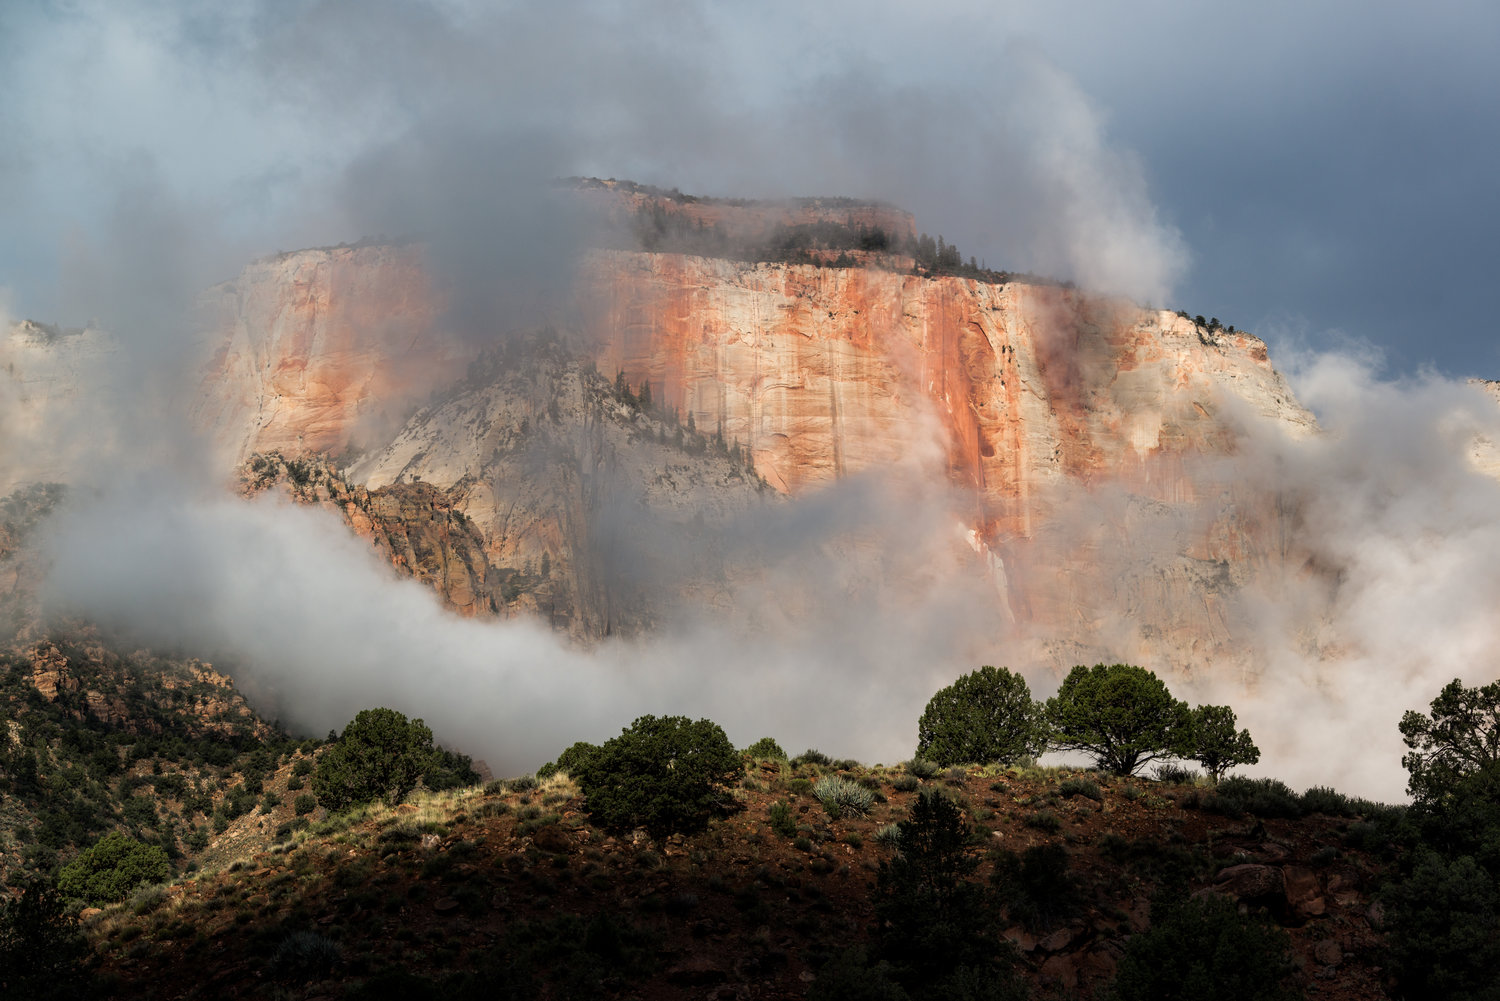 Low Fog and Clouds in Zion With Trees in Foreground